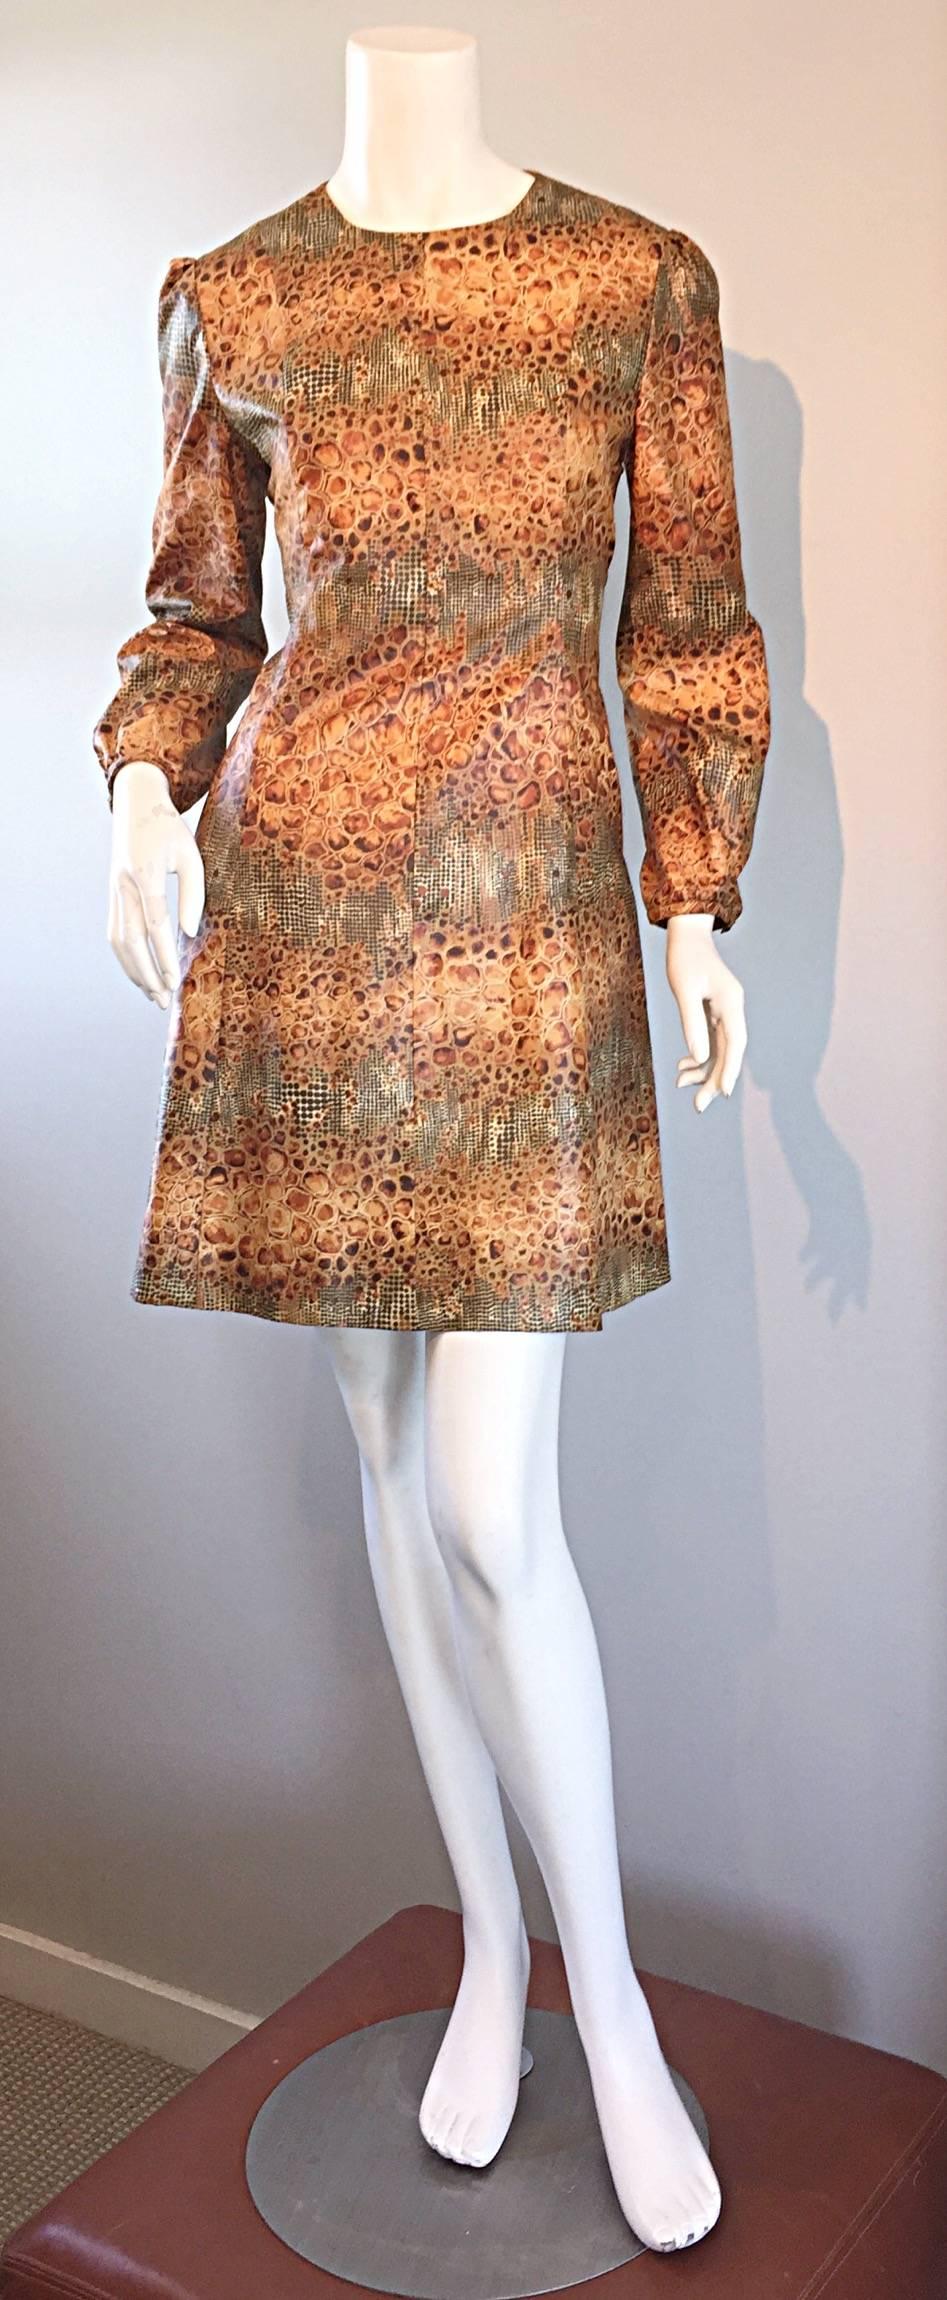 Awesome 1960s reptile print dress! Incredible alligator/crocodile print, mixed with a snake/lizard print. Wonderful flattering A-Line fit. Bubble sleeves, with elastic at each wrist cuff. Full metal zipper up the back. Very well made. Looks great